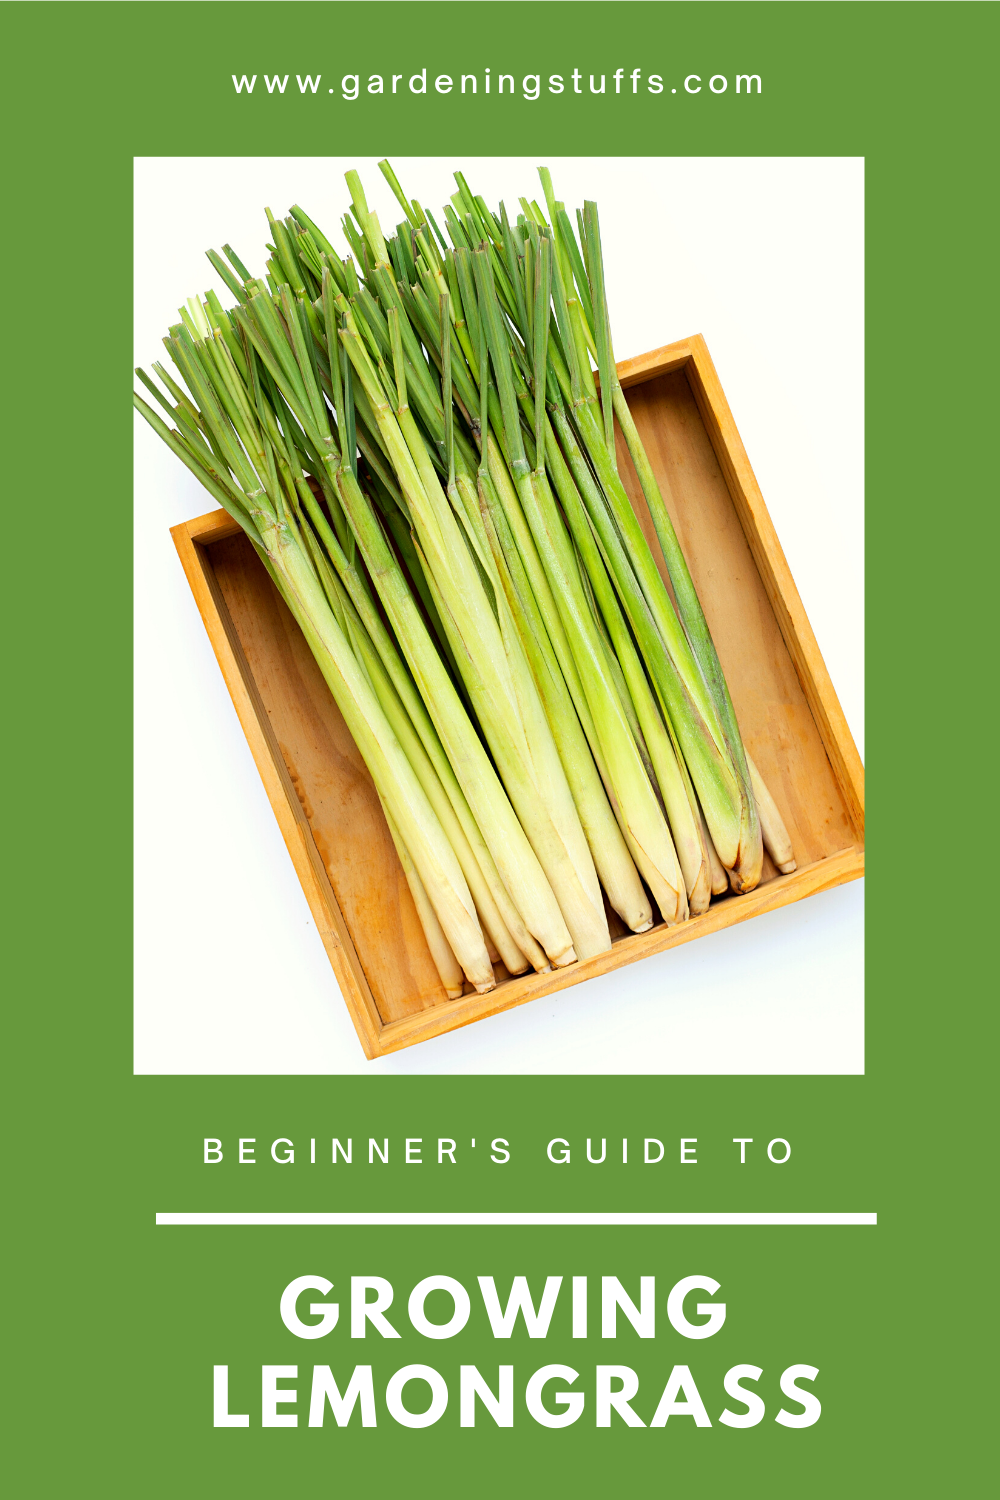 Lemongrass is a fragrant tropical grass that is widely used in Asian cooking and it’s easy to grow for yourself. Read on for our handy guide on how to grow lemongrass.